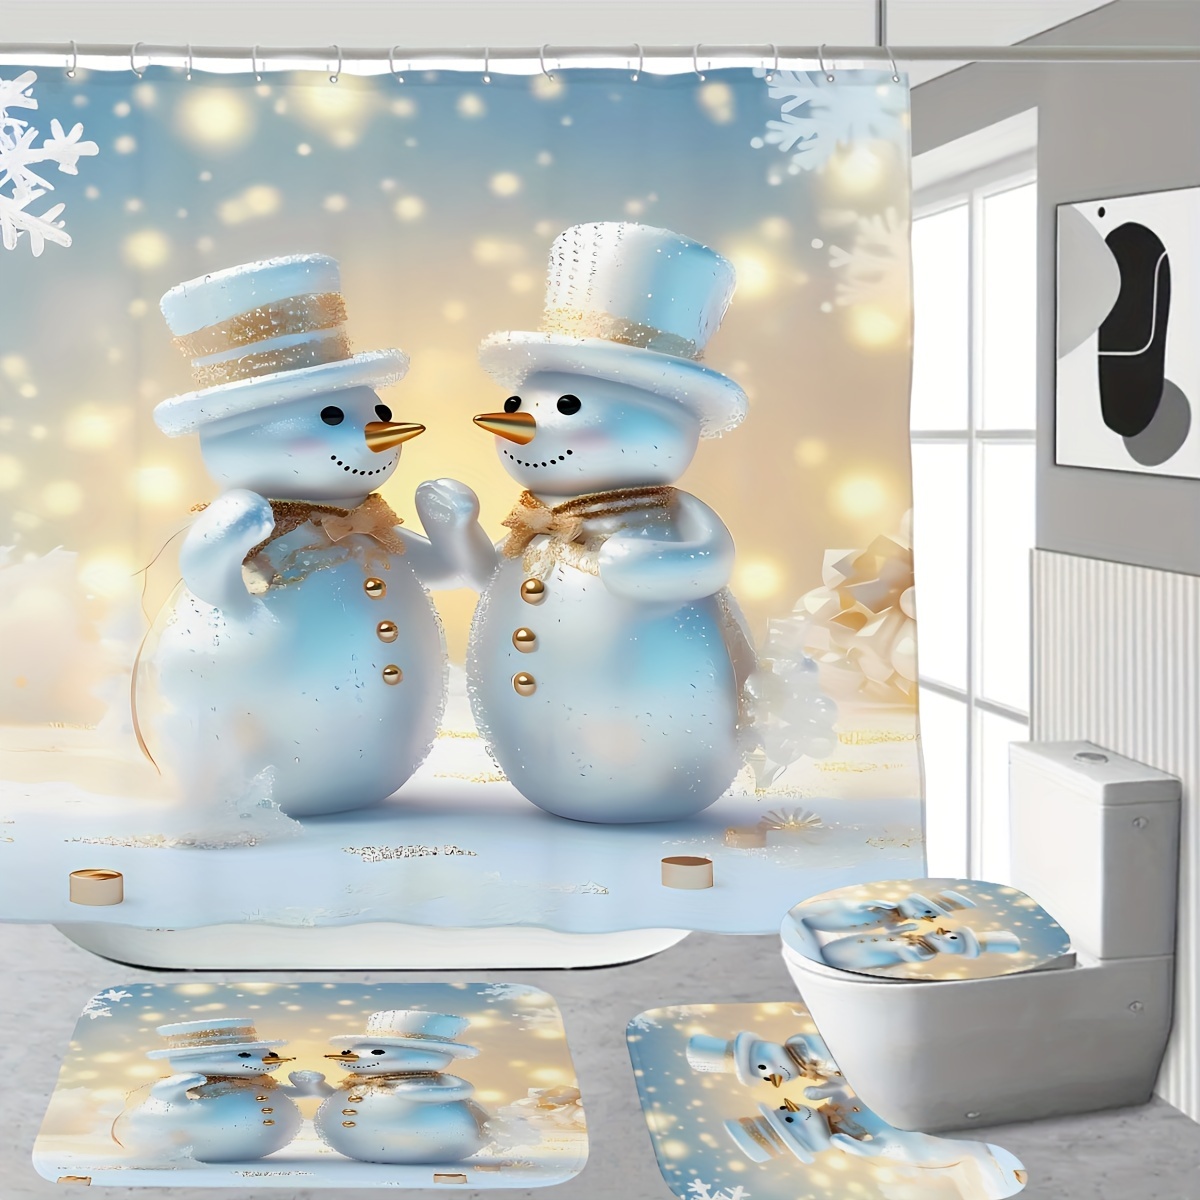 

Snowman Shower Curtain Set With Non-slip Bath Mat, Toilet Lid Cover & Rug - Cordless Polyester Christmas Bathroom Decor Ensemble, Woven Forest Themed Digital Print - Includes 12 Hooks, Stain Resistant